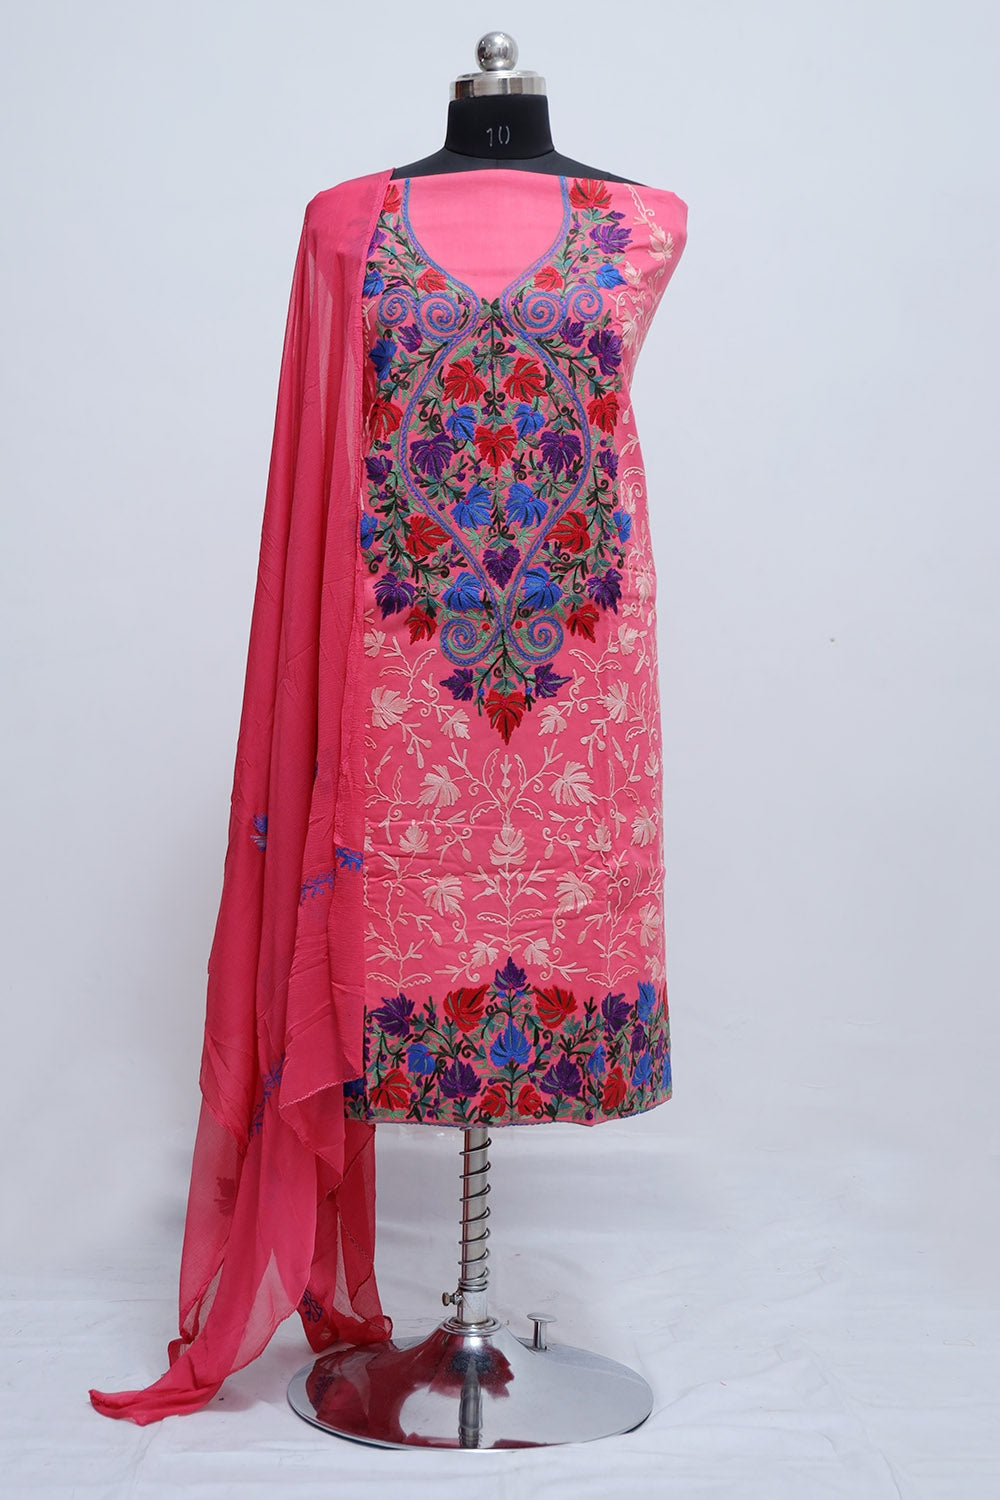 Pink Colour Designer With Beautiful Kashmiri Embroidery